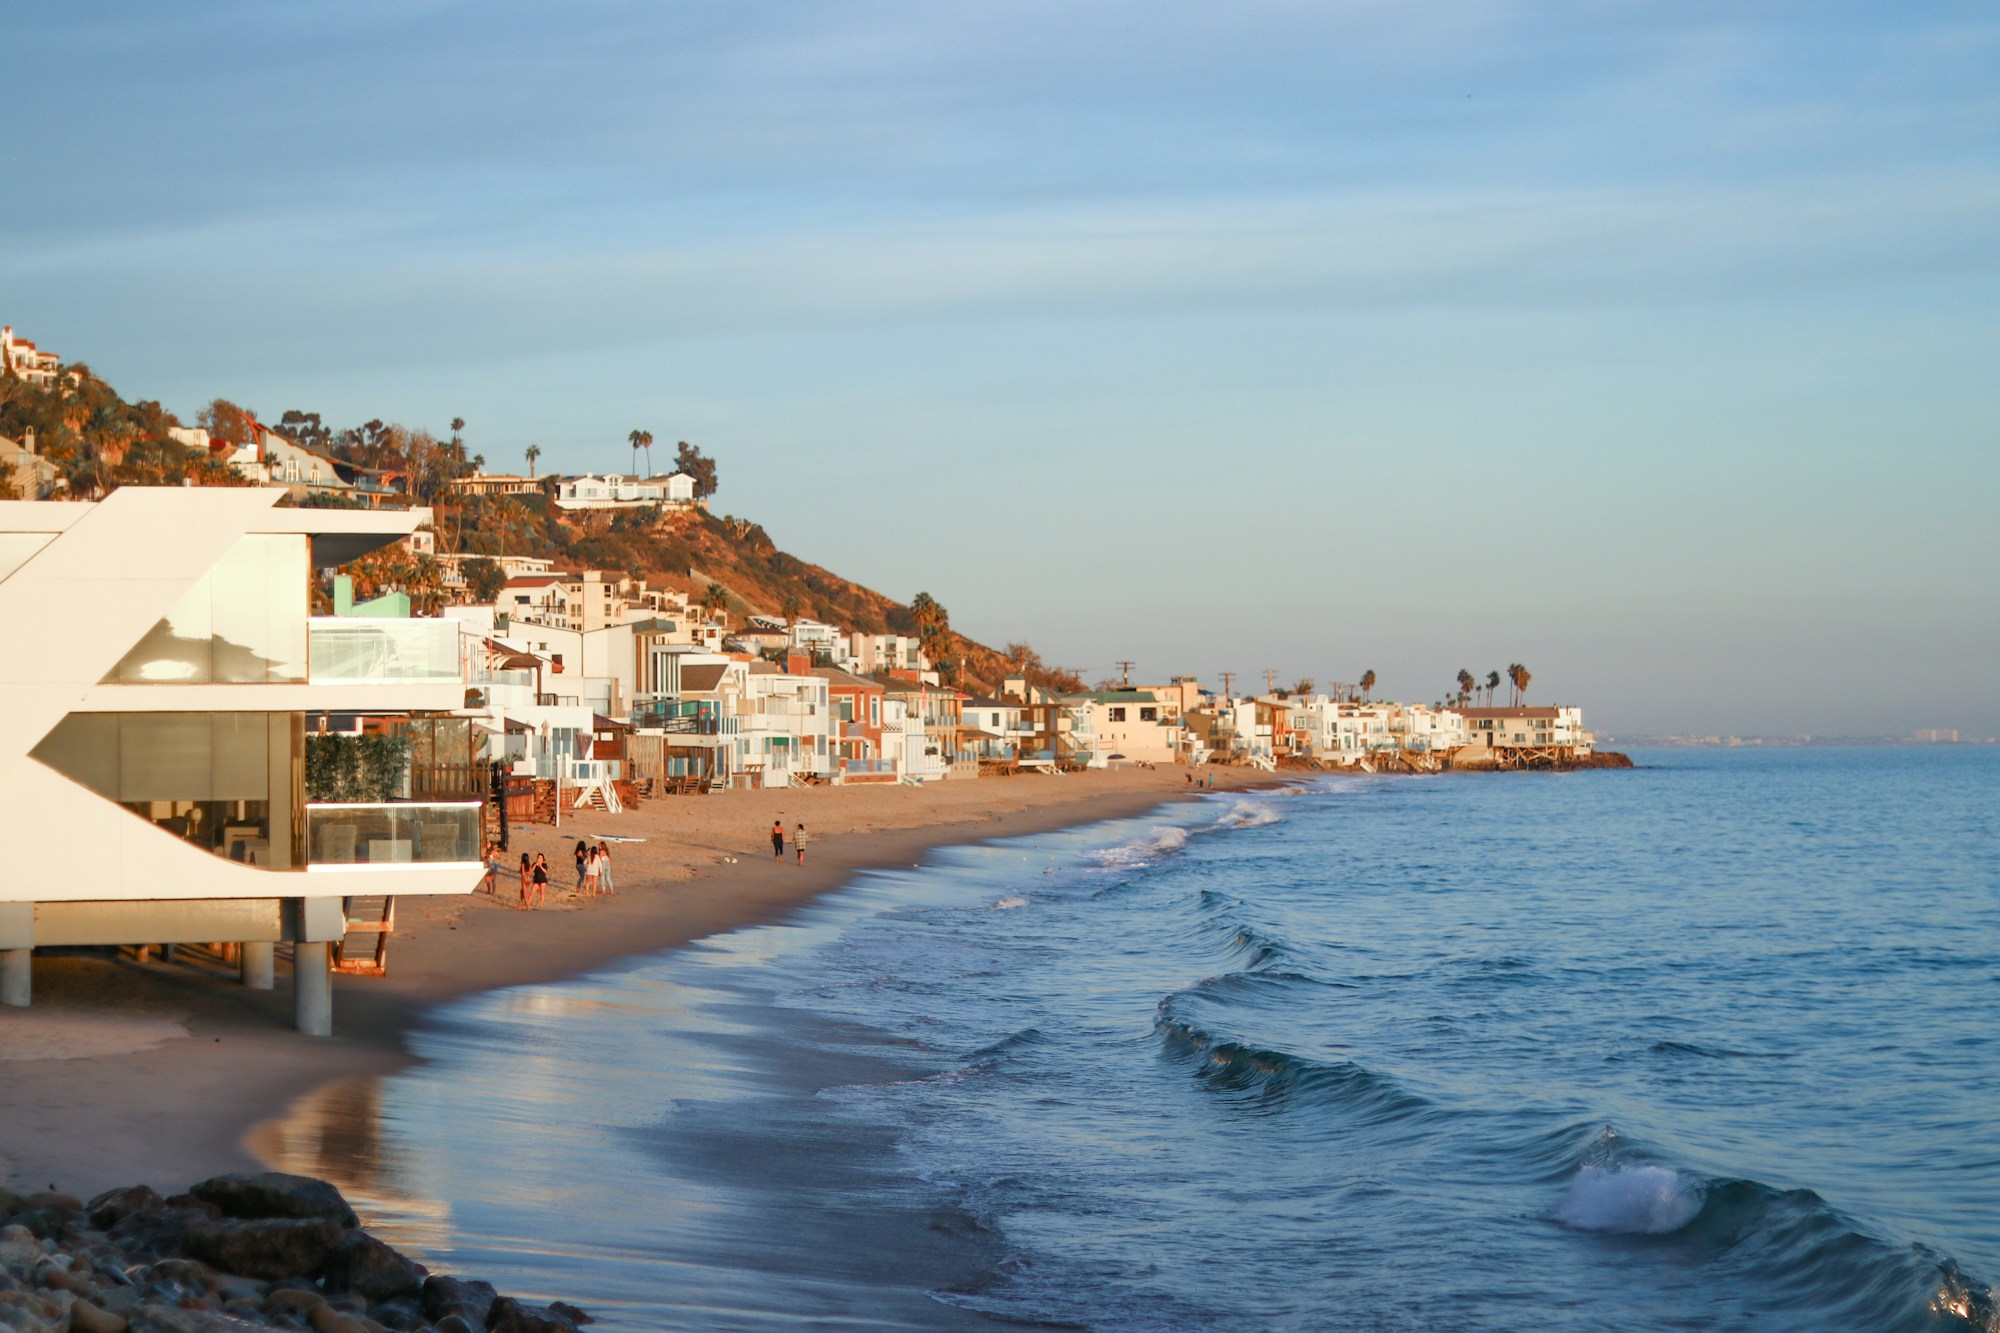 What to See in Malibu: Travel Guide & Highlights